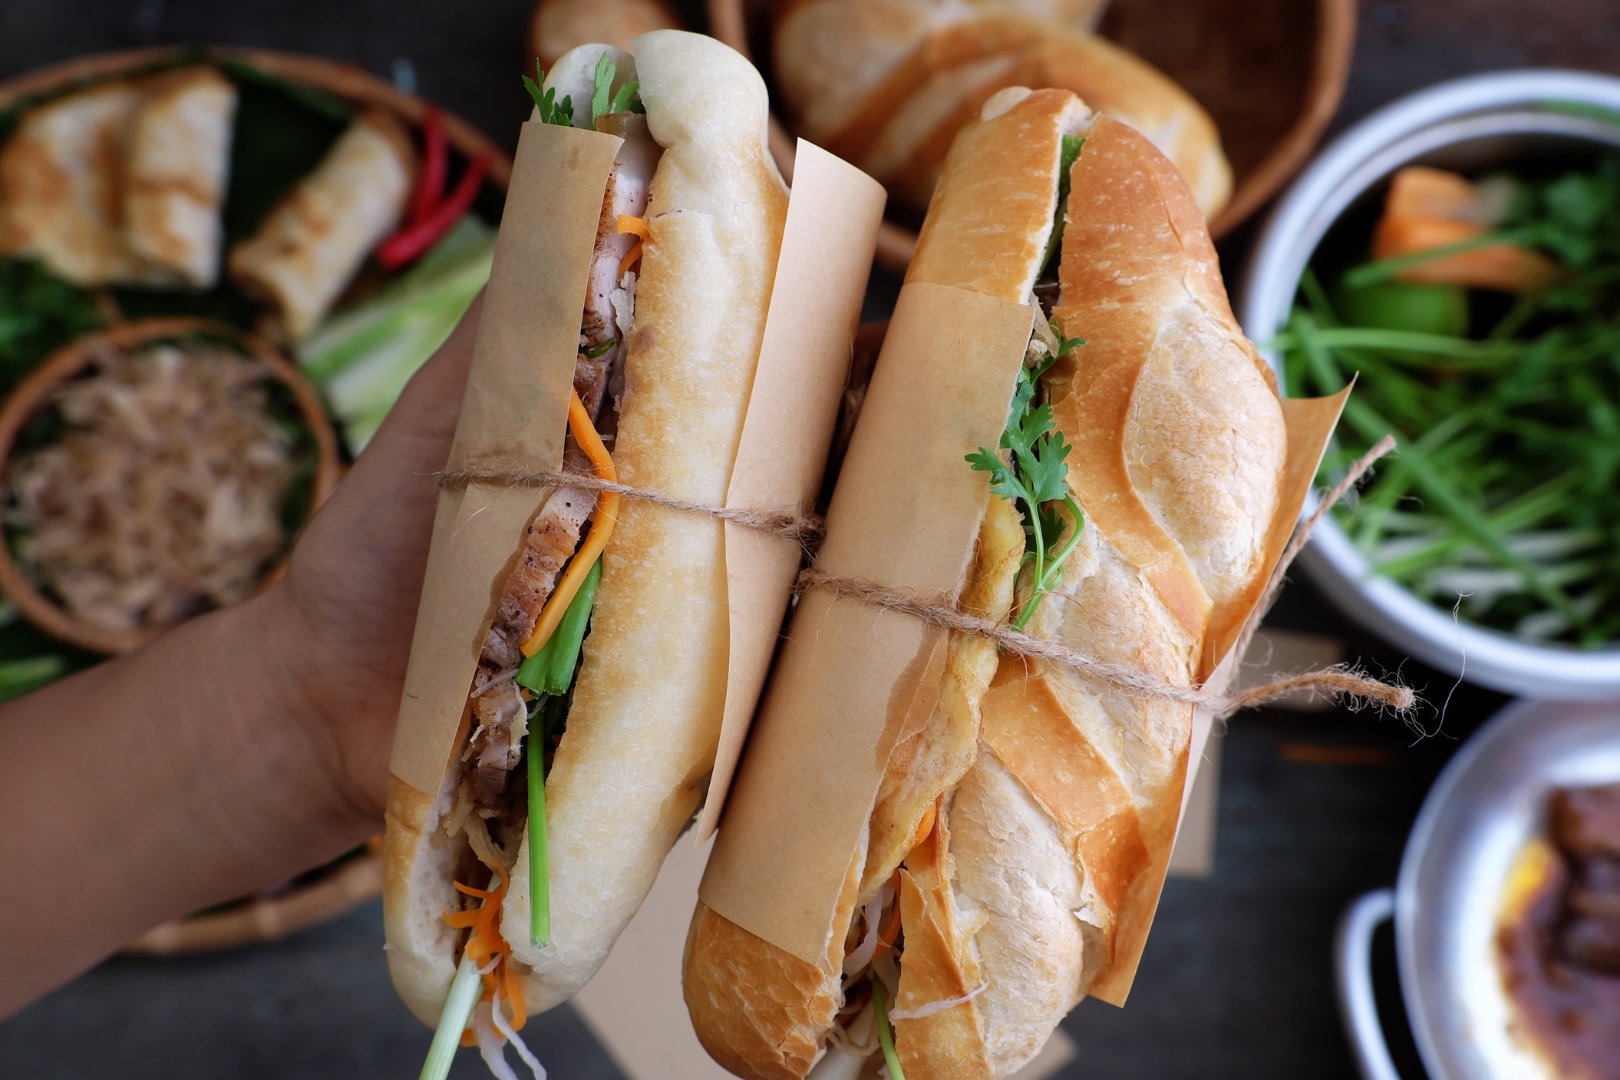 Vietnamese baguettes are not only popular within Vietnam but also known and loved worldwide. I